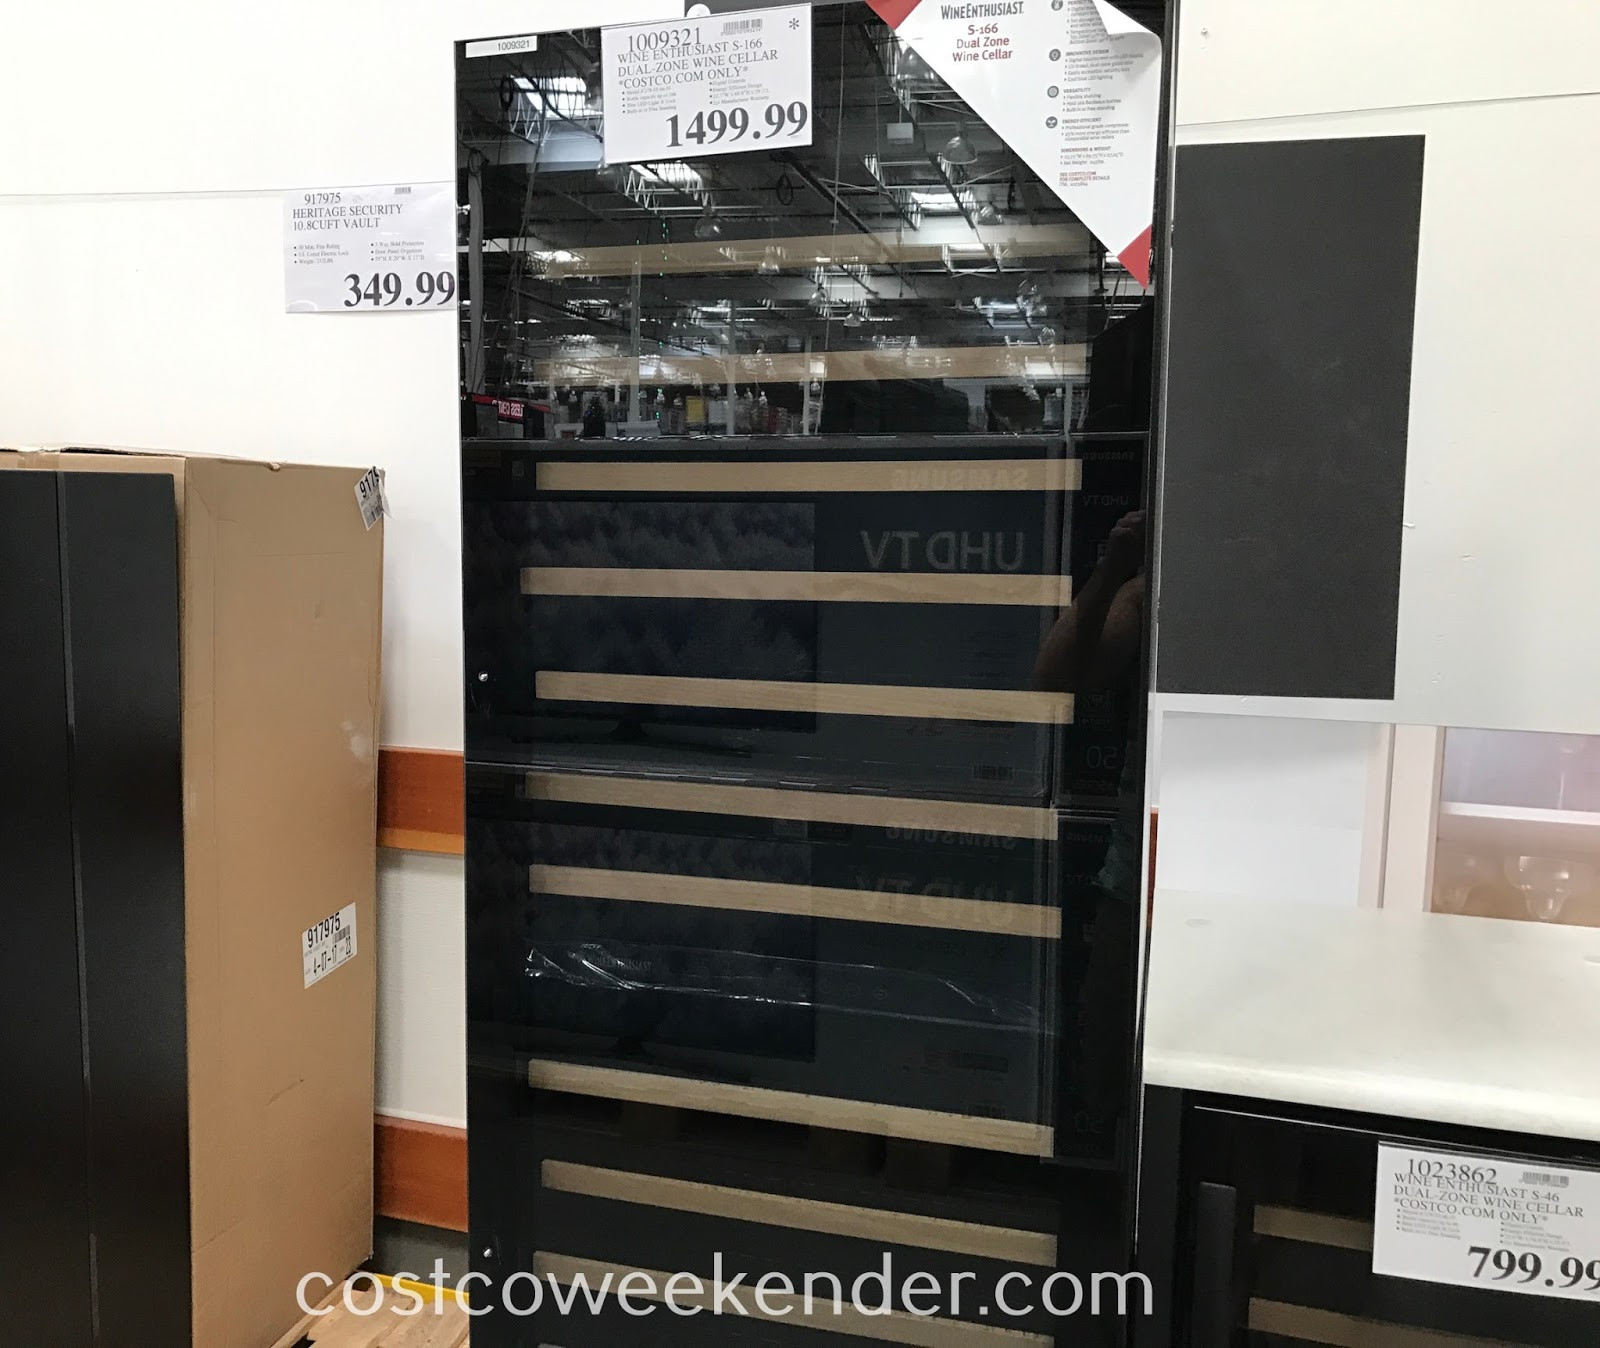 Best ideas about Costco Wine Cellar
. Save or Pin Costco Weekender Making Every Weekend A Costco Weekend Now.